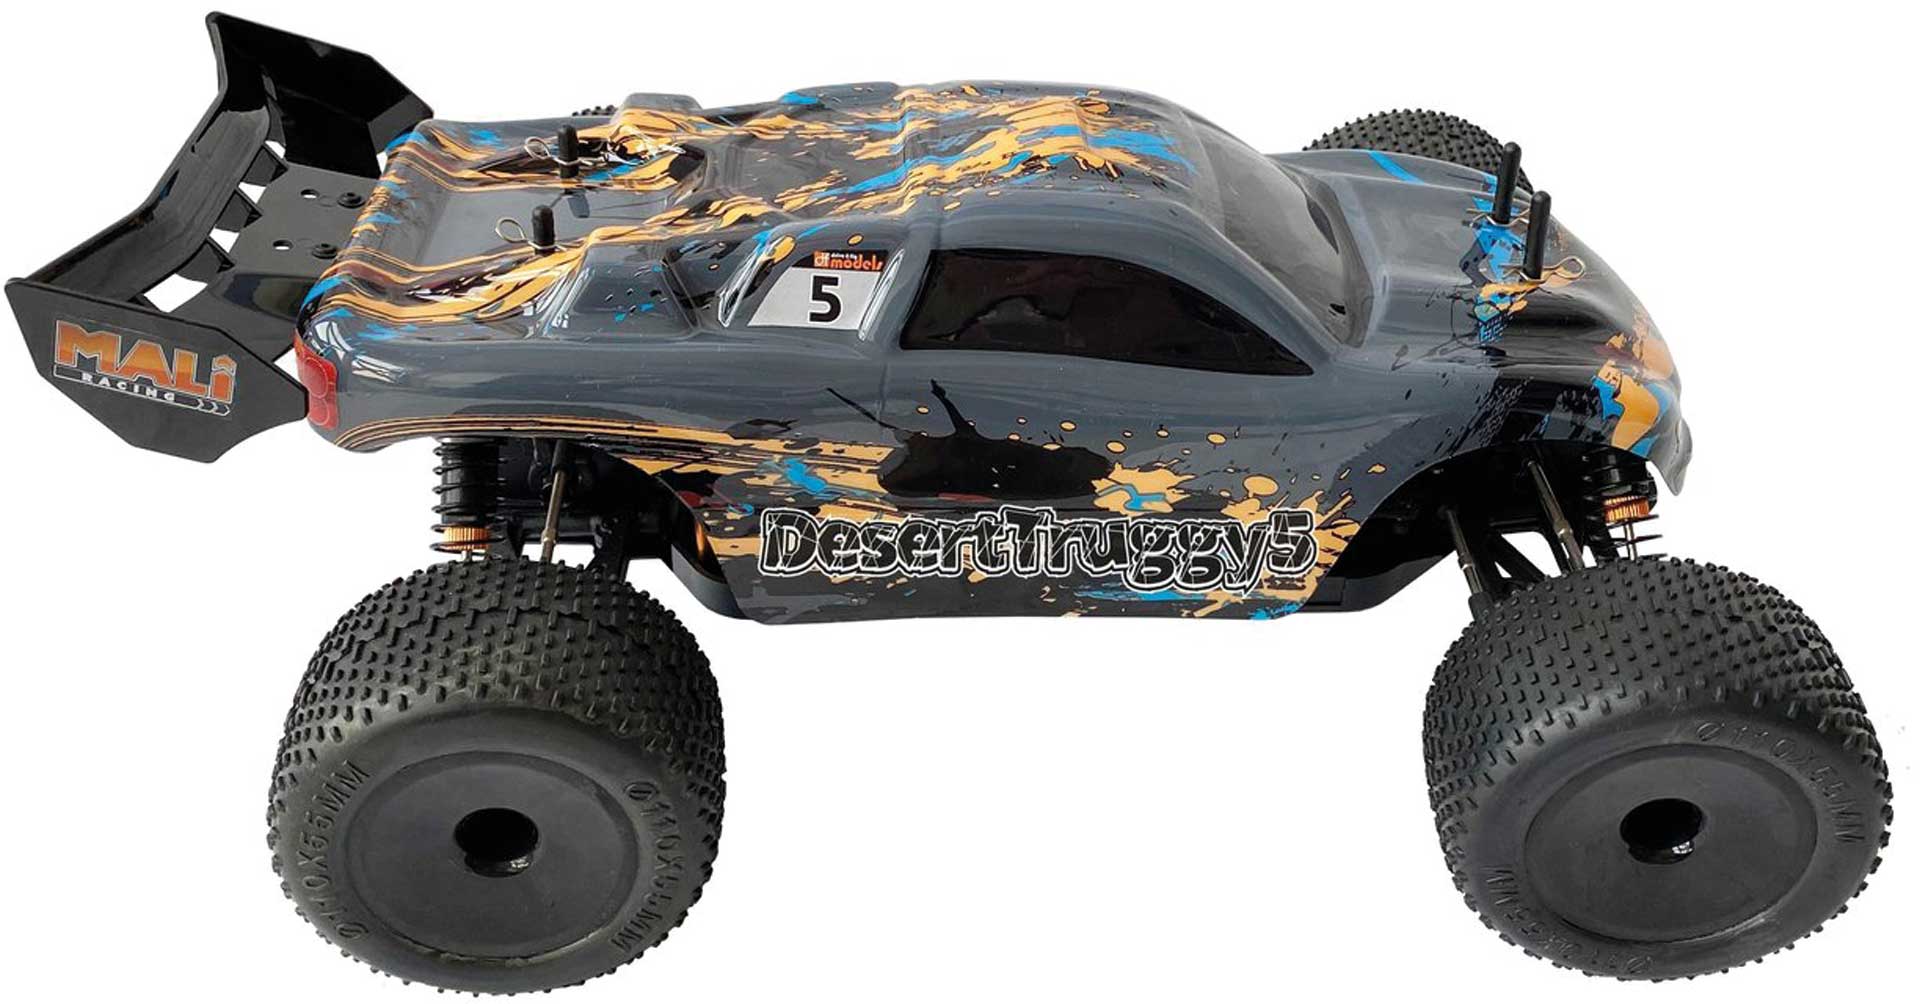 DRIVE & FLY MODELS DESERT TRUGGY 5 TRUGGY BRUSHED RTR 1/10